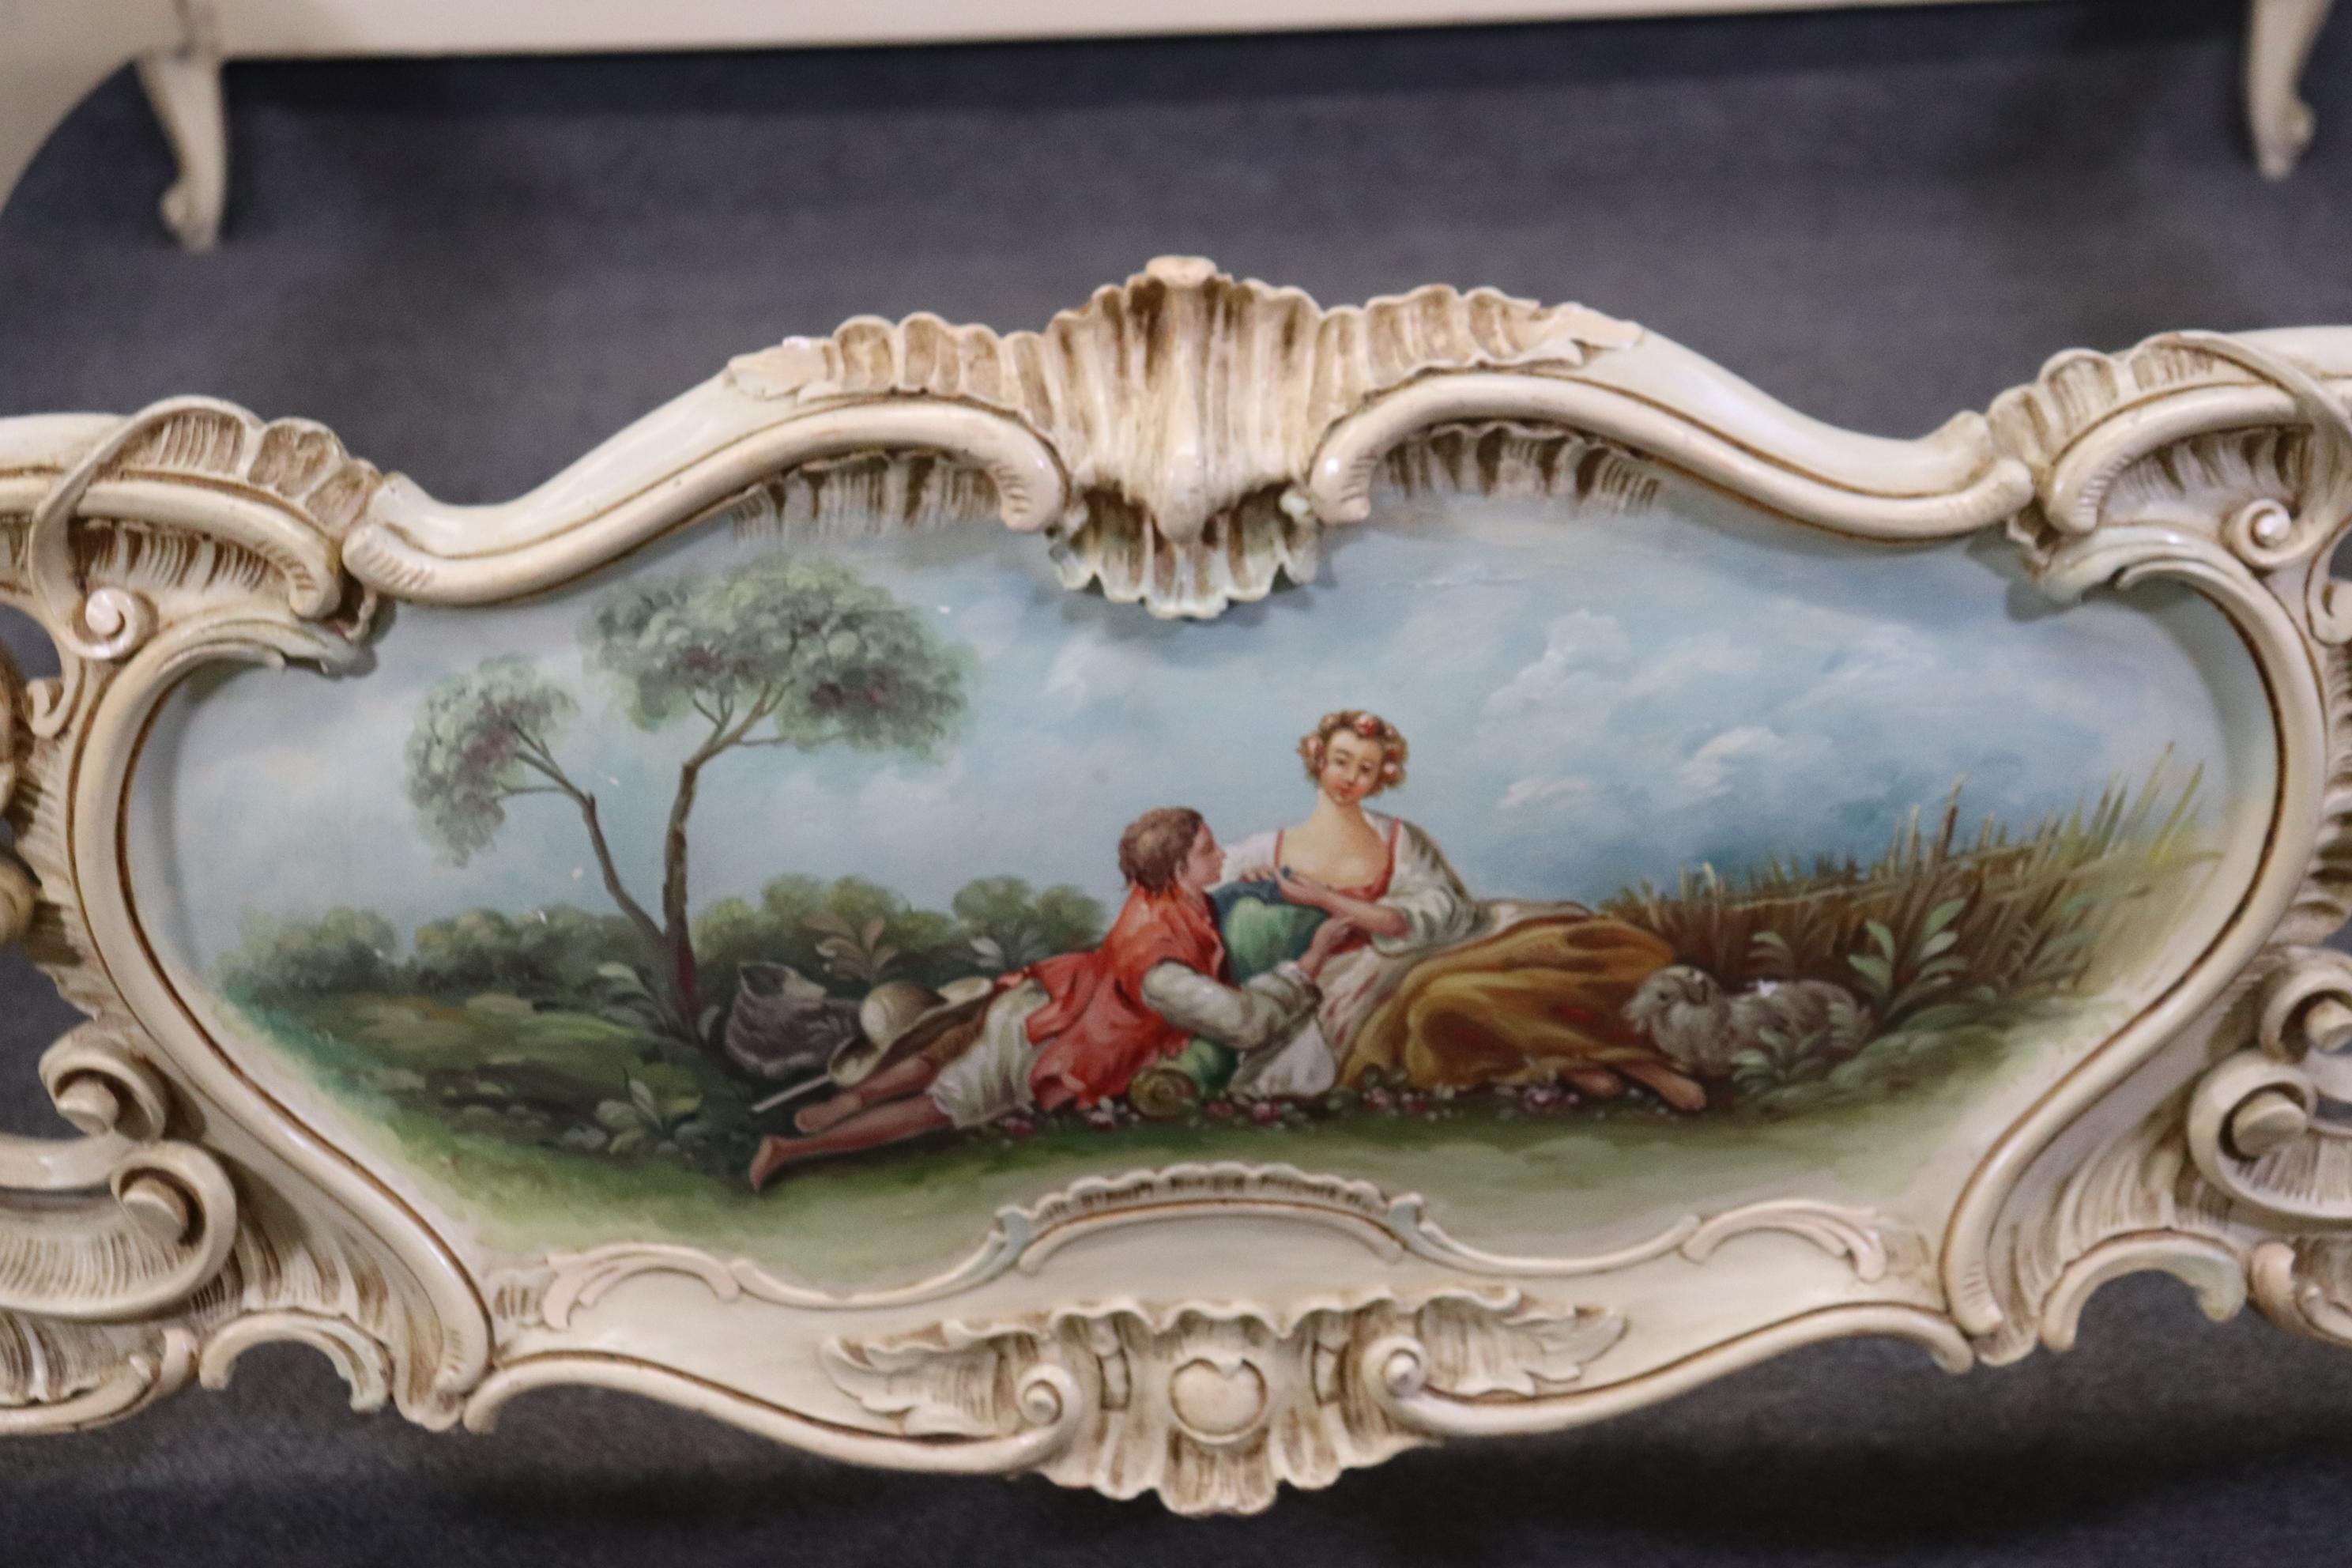 rococo bed frame